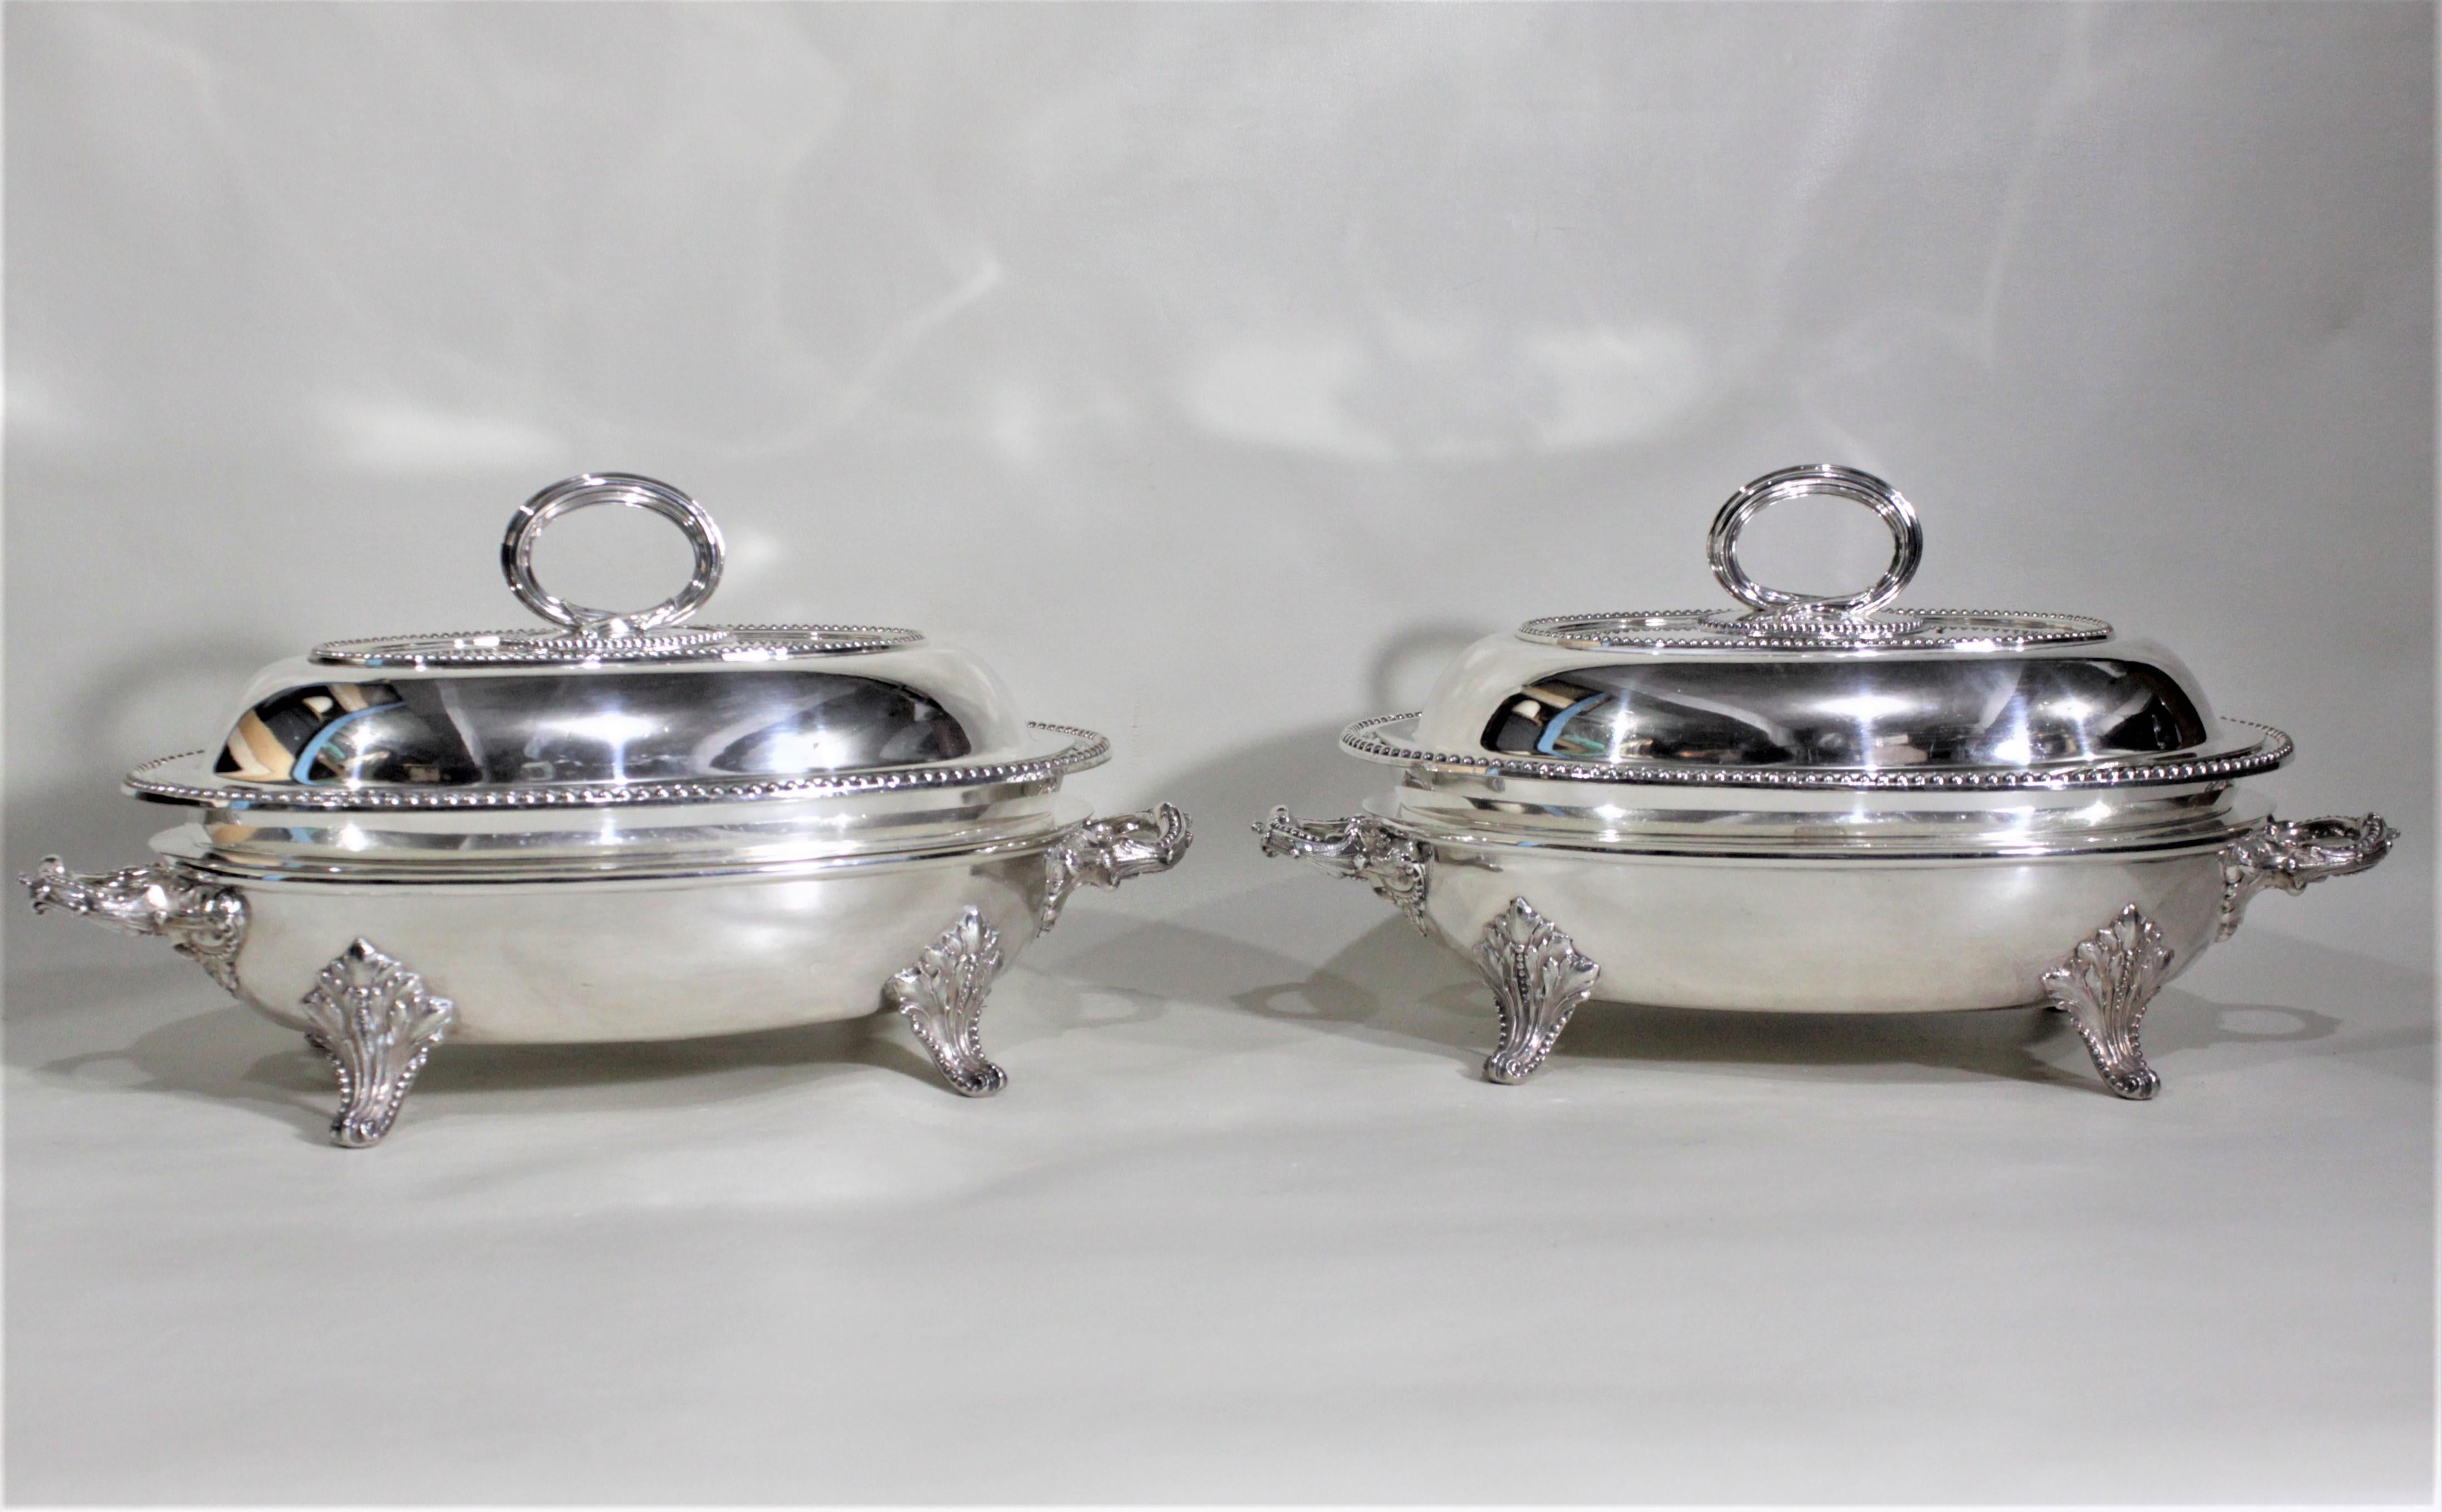 This pair of antique silver plated covered entree servers was made in Sheffield England by the James Dixon and Sons Company in circa 1880 in the period Victorian style. Each server has a heavy footed base with a shallow insert, followed by a serving